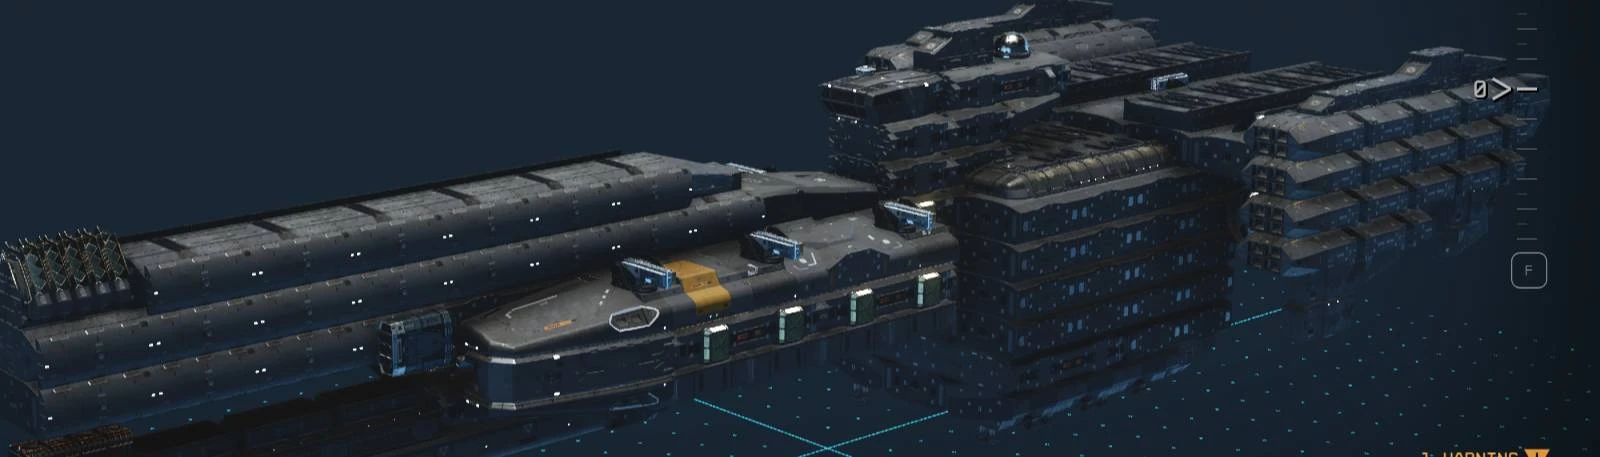 UNSC Charon Class Frigate at Starfield Nexus - Mods and Community